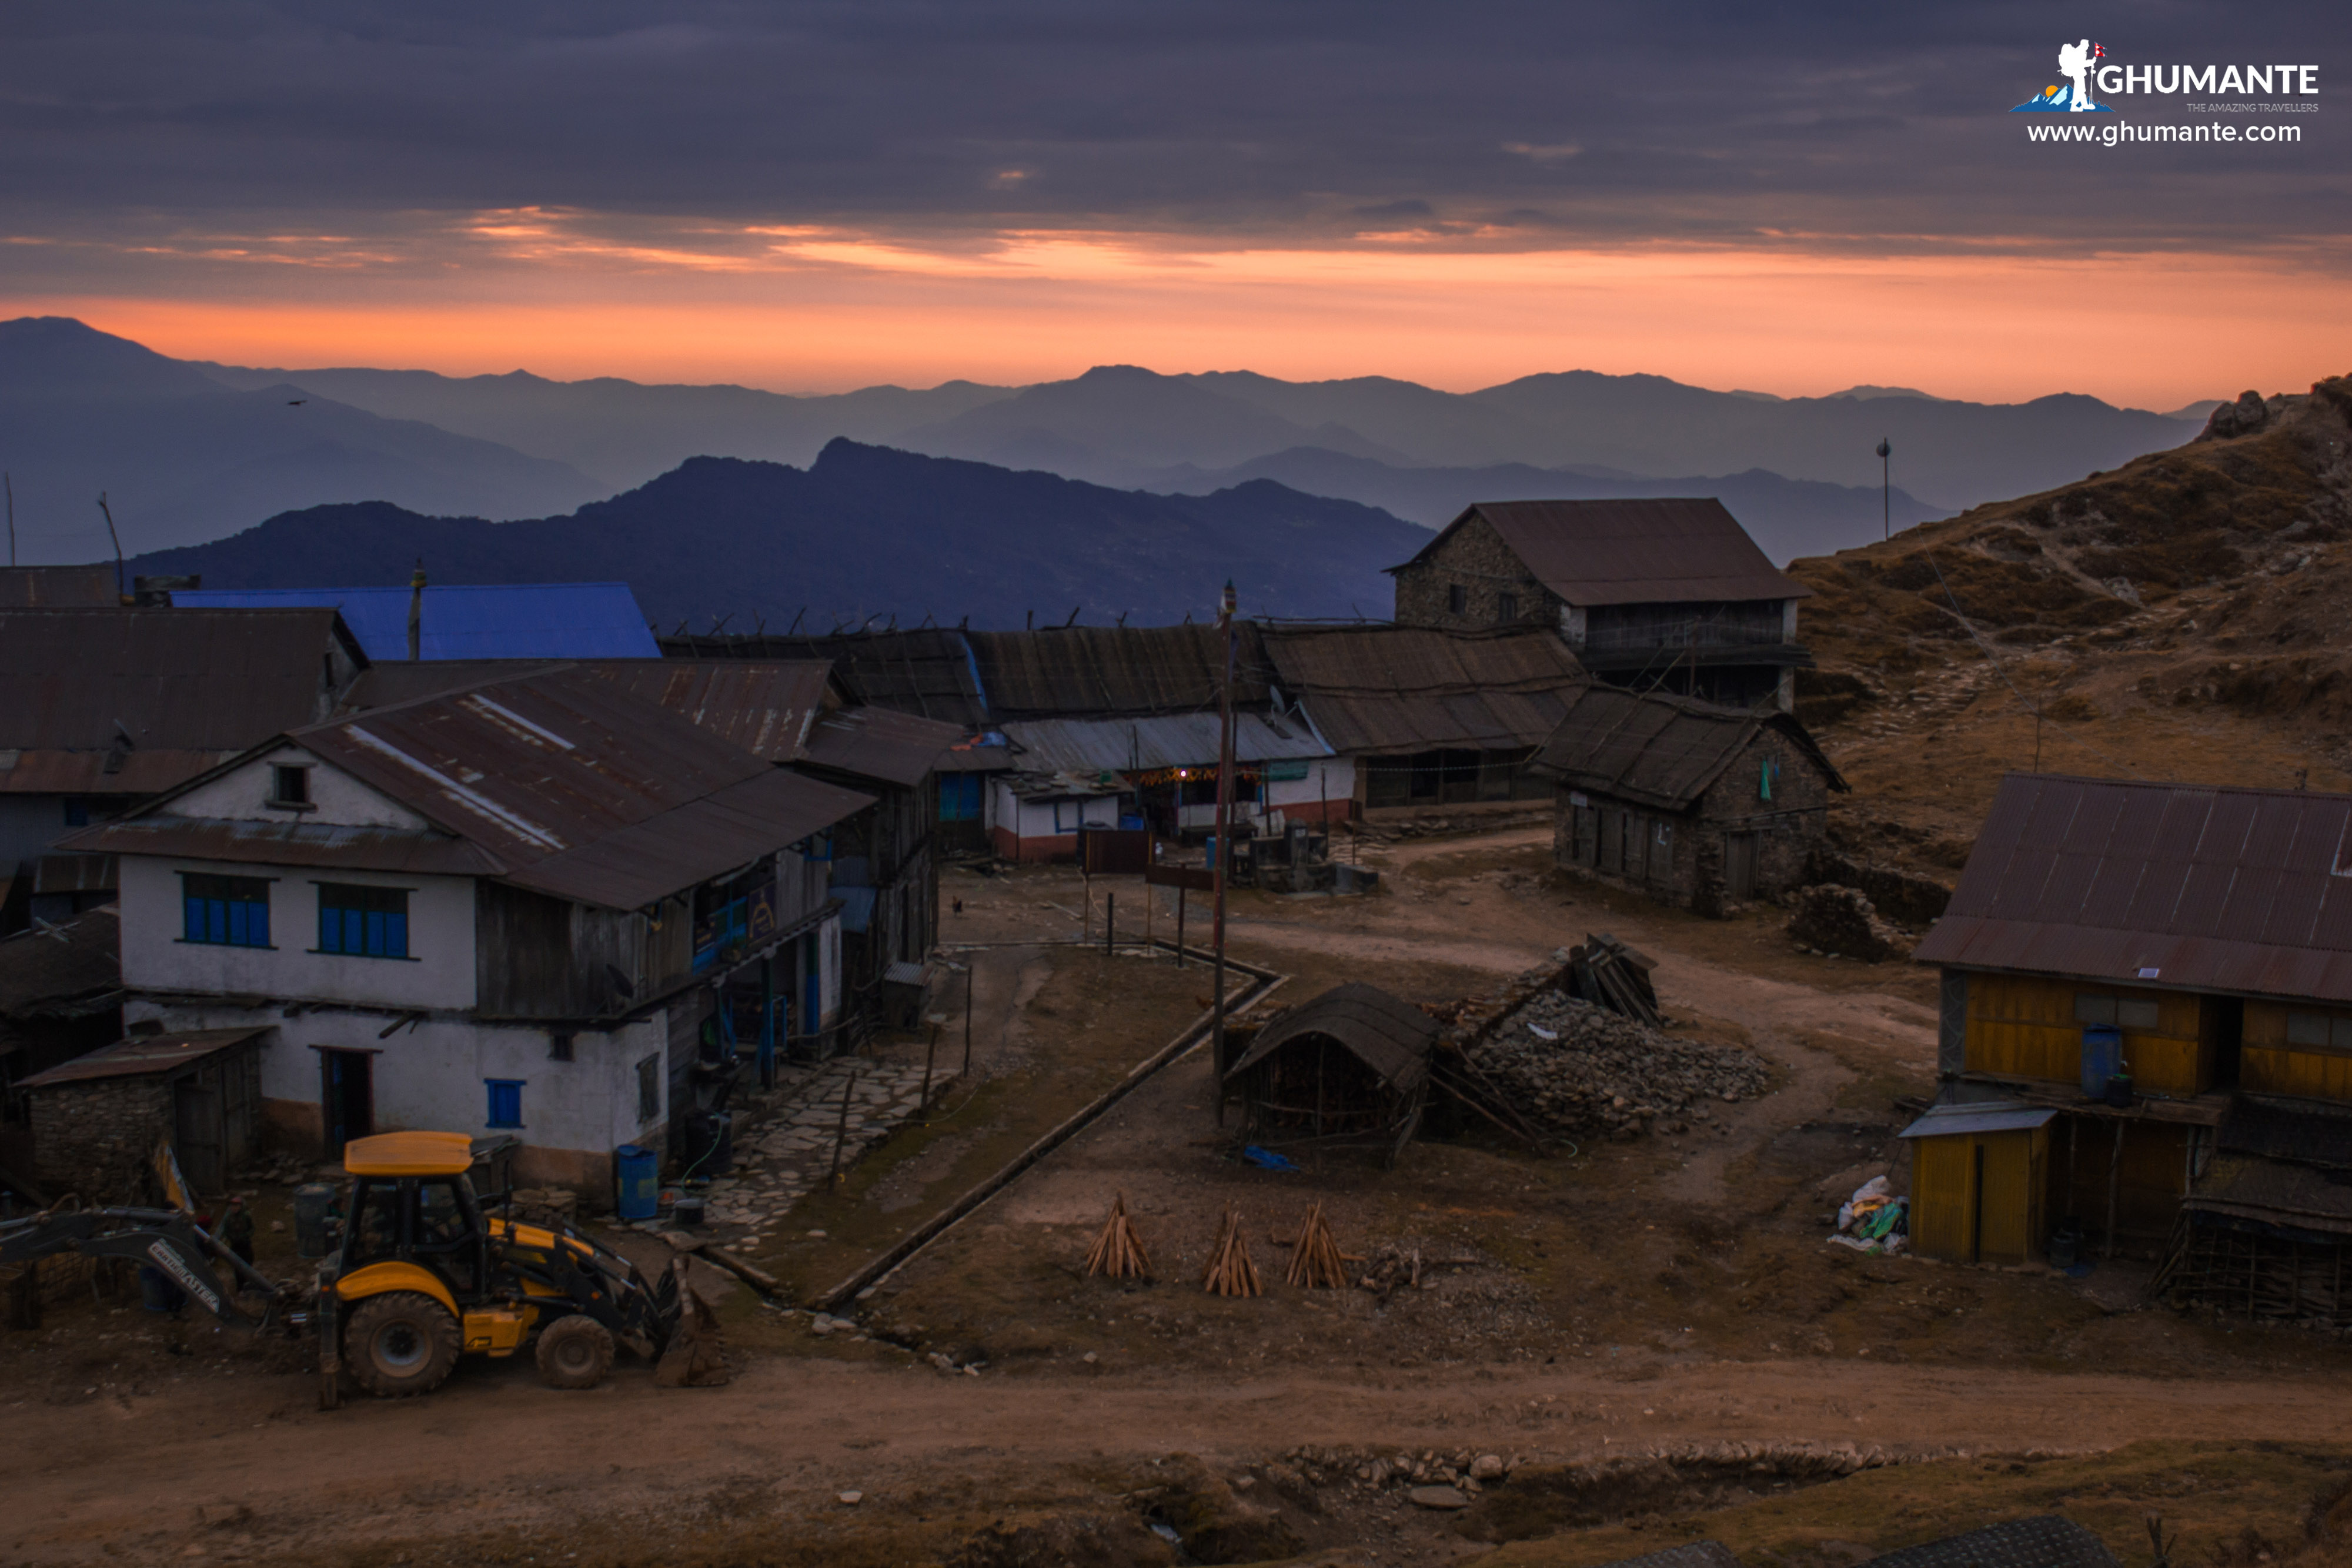 NASA has recently awarded a grant to study the changing urban patterns of the Himalaya